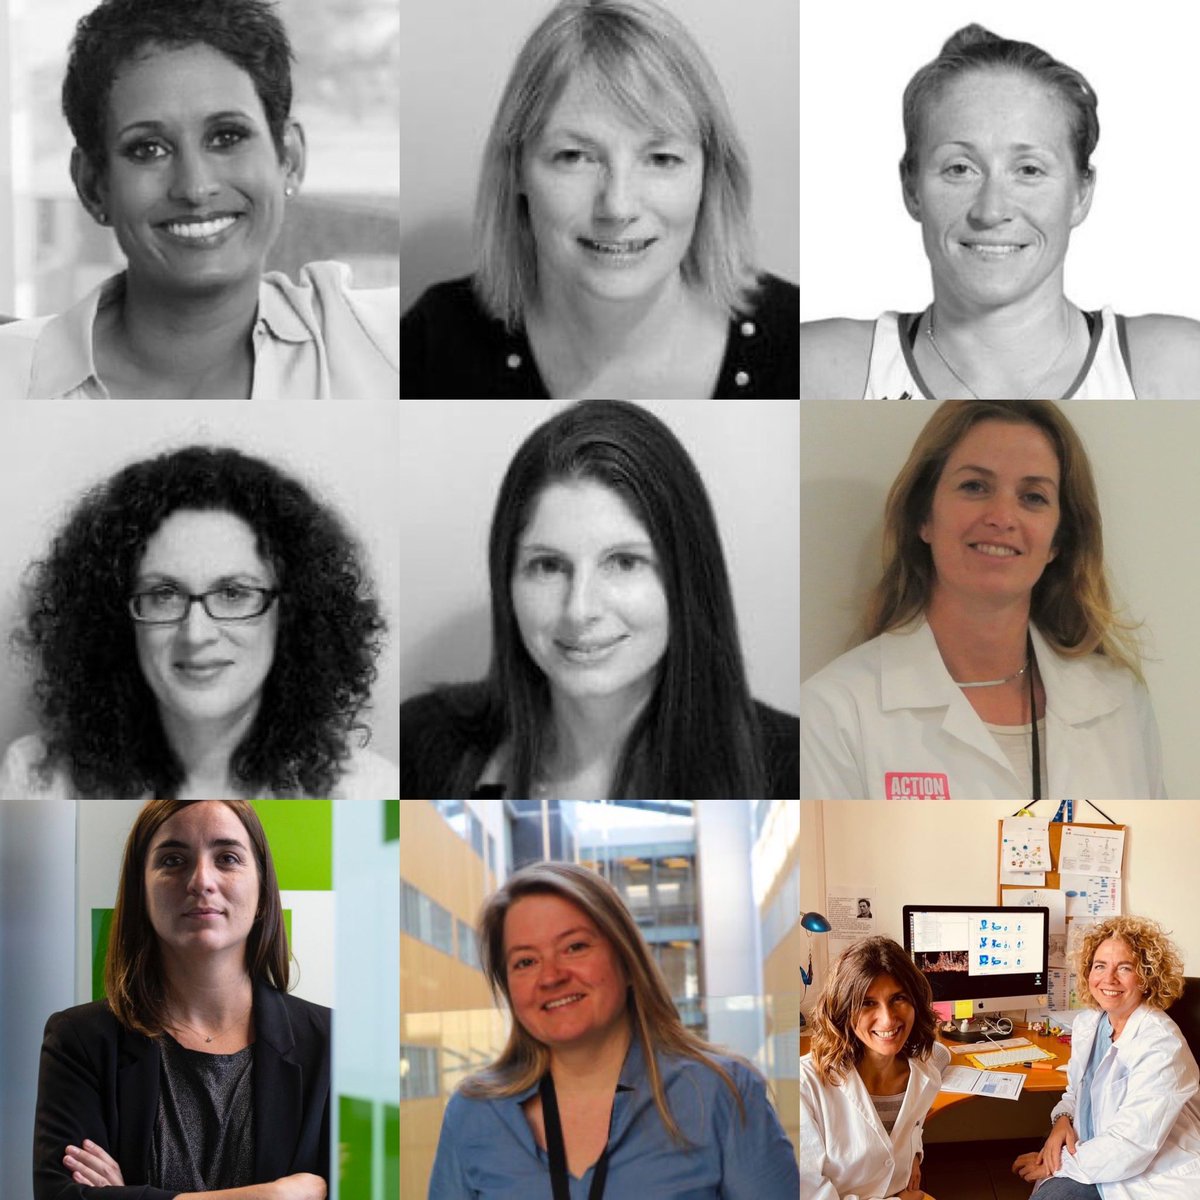 Happy International Women’s Day! Let's celebrate the strong, powerful women in our lives who have made a positive impact. Join us in recognising the following trustees, staff, patrons & researchers bringing hope to those living with A-T. #InternationalWomensDay #WomenEmpowerment